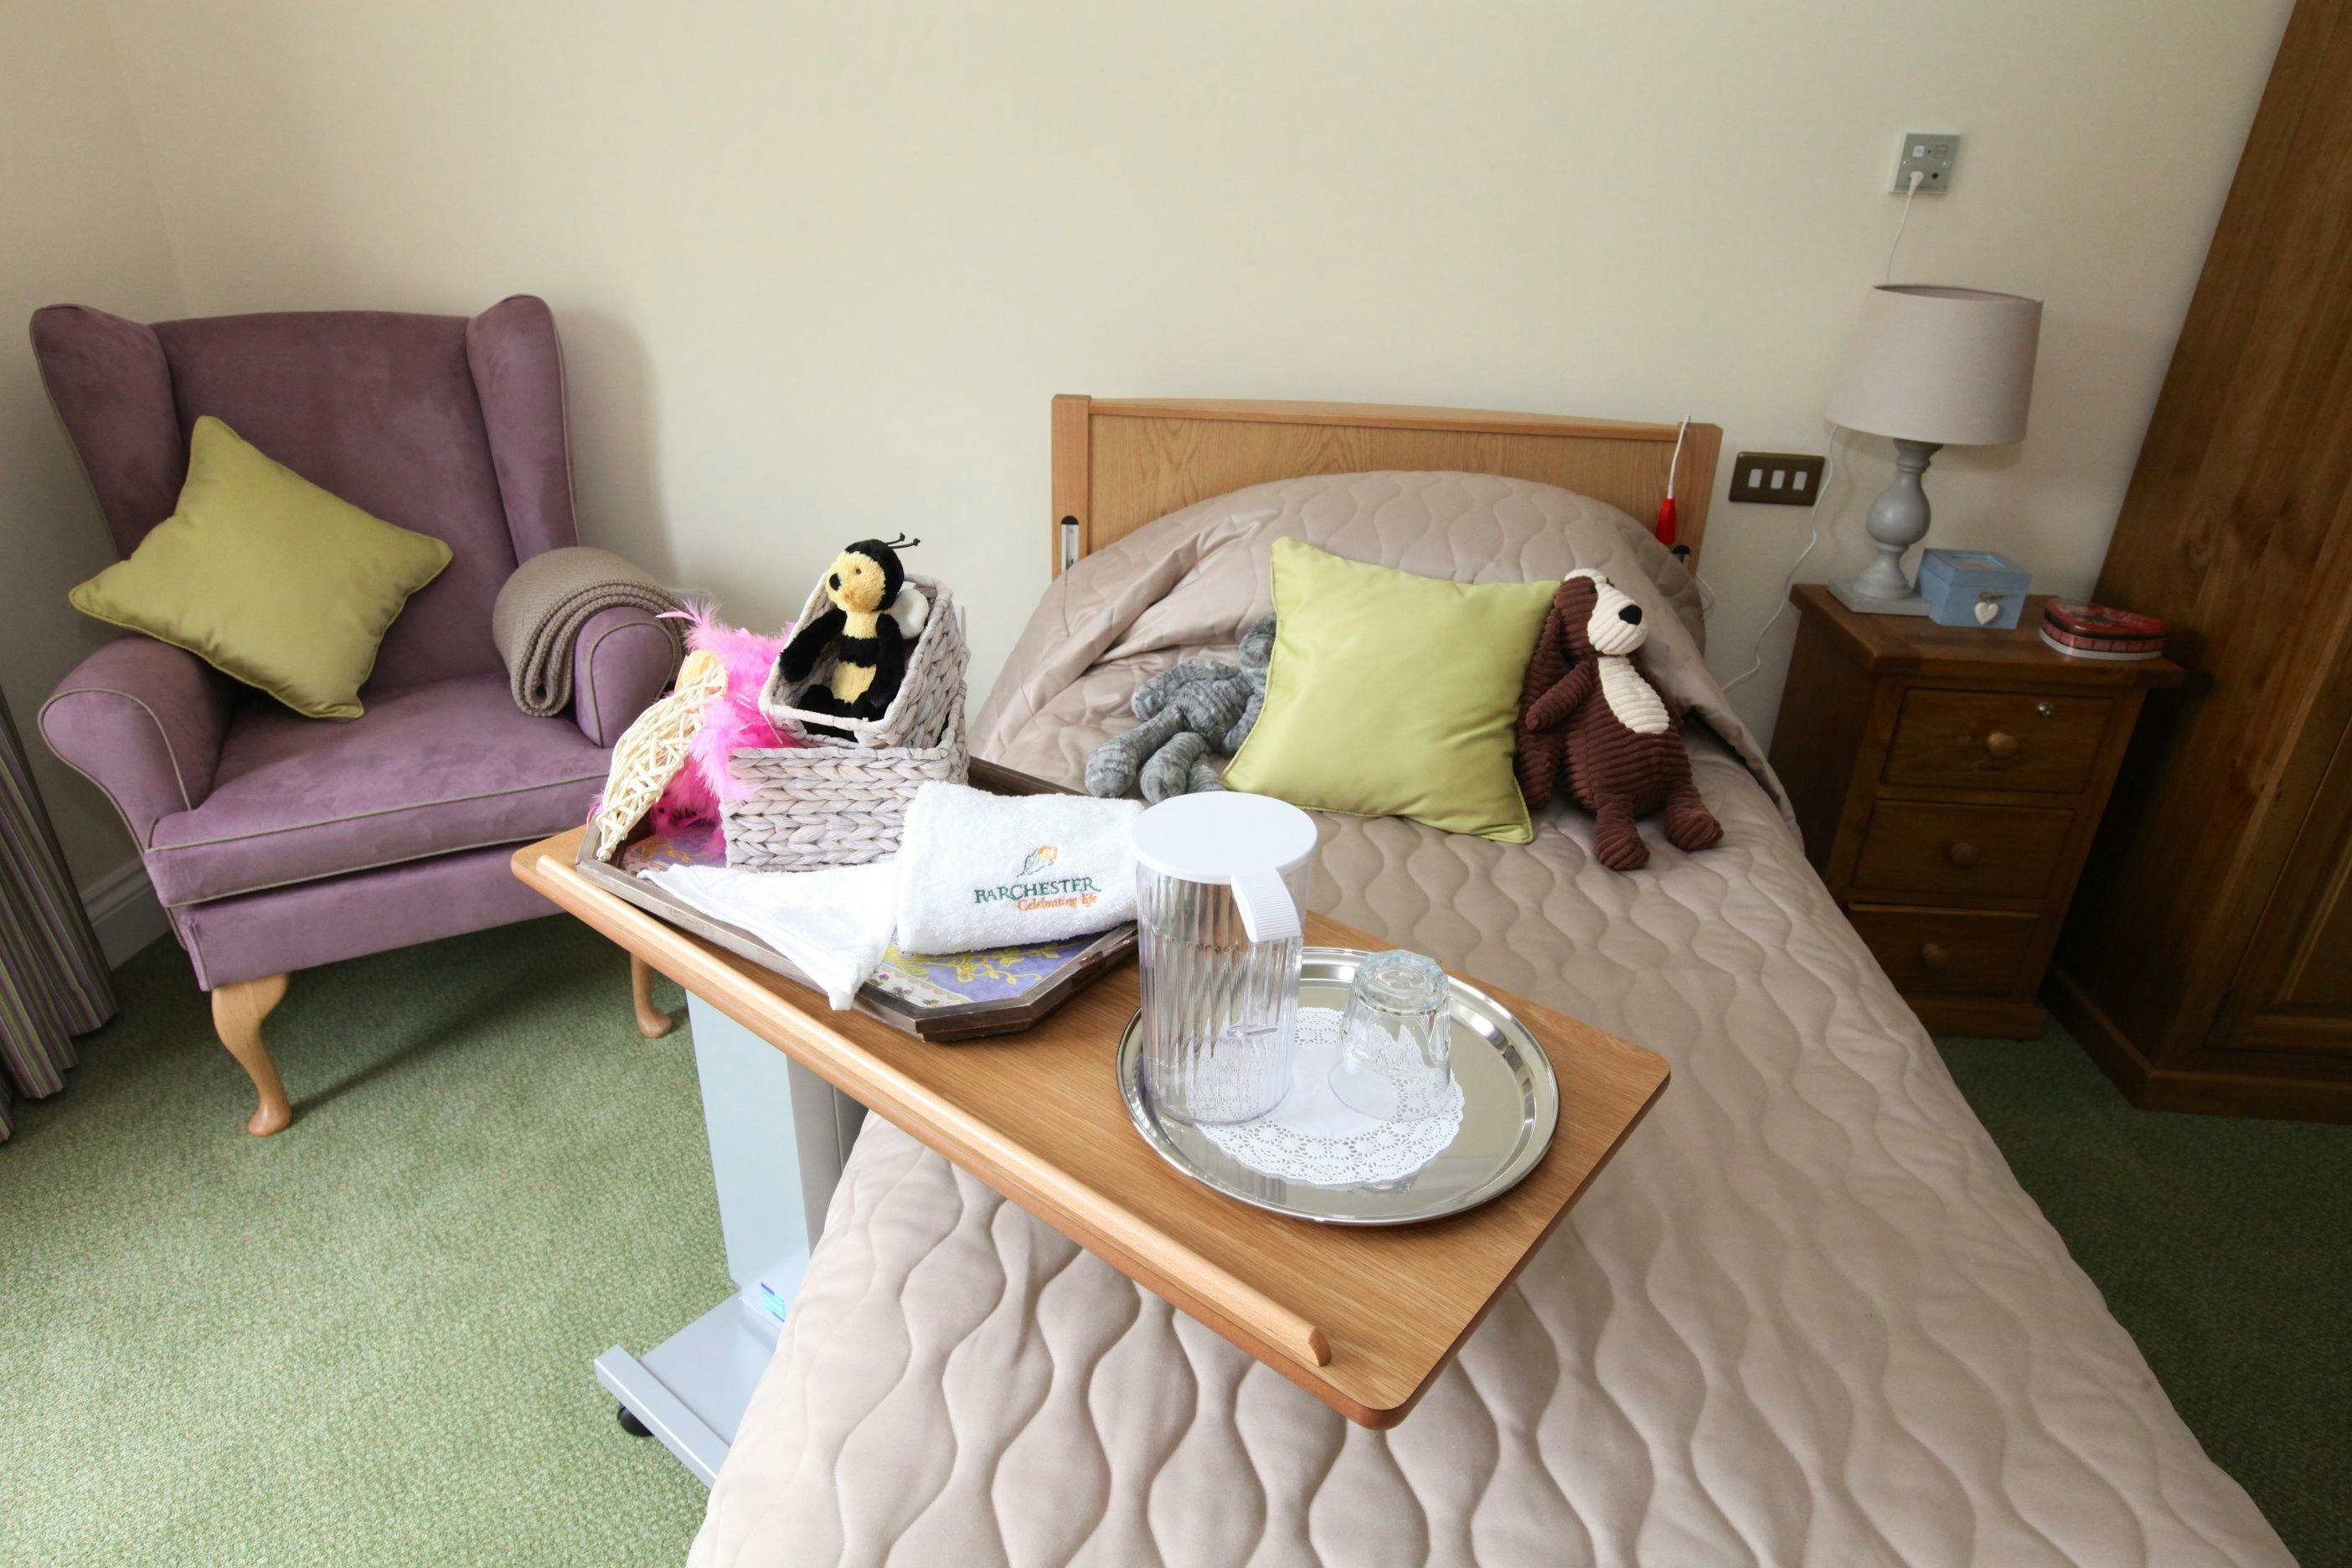 Bedroom of Bryn Ivor Lodge care home in Newport, Cardiff